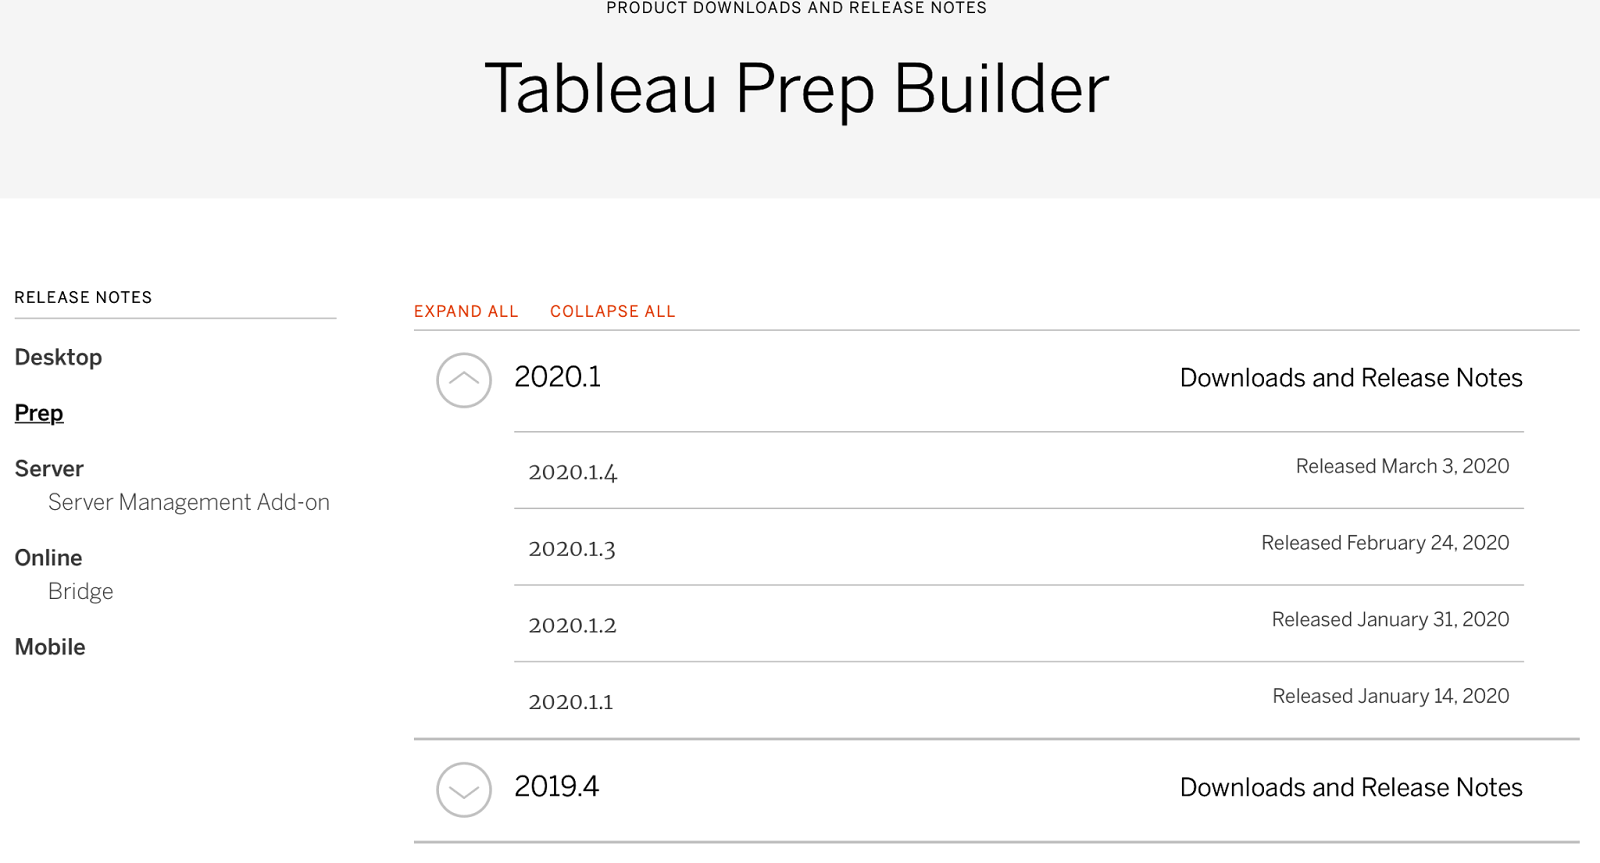 Tableau’s download page